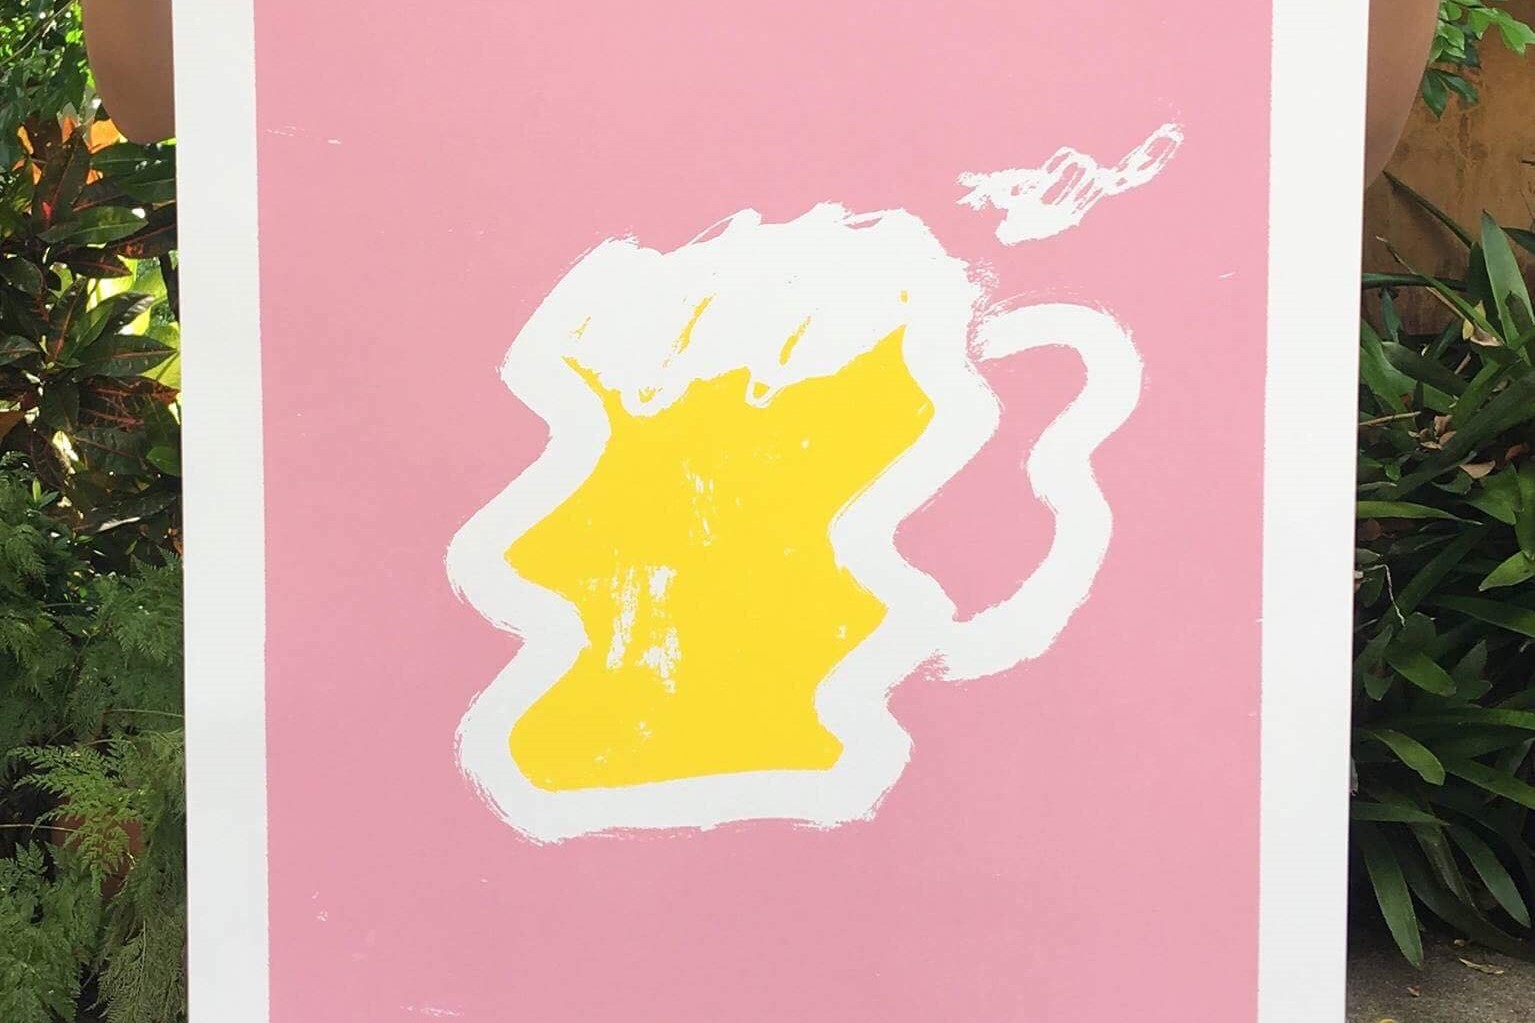 Our 'friday' first silk screen posters are available in two colors